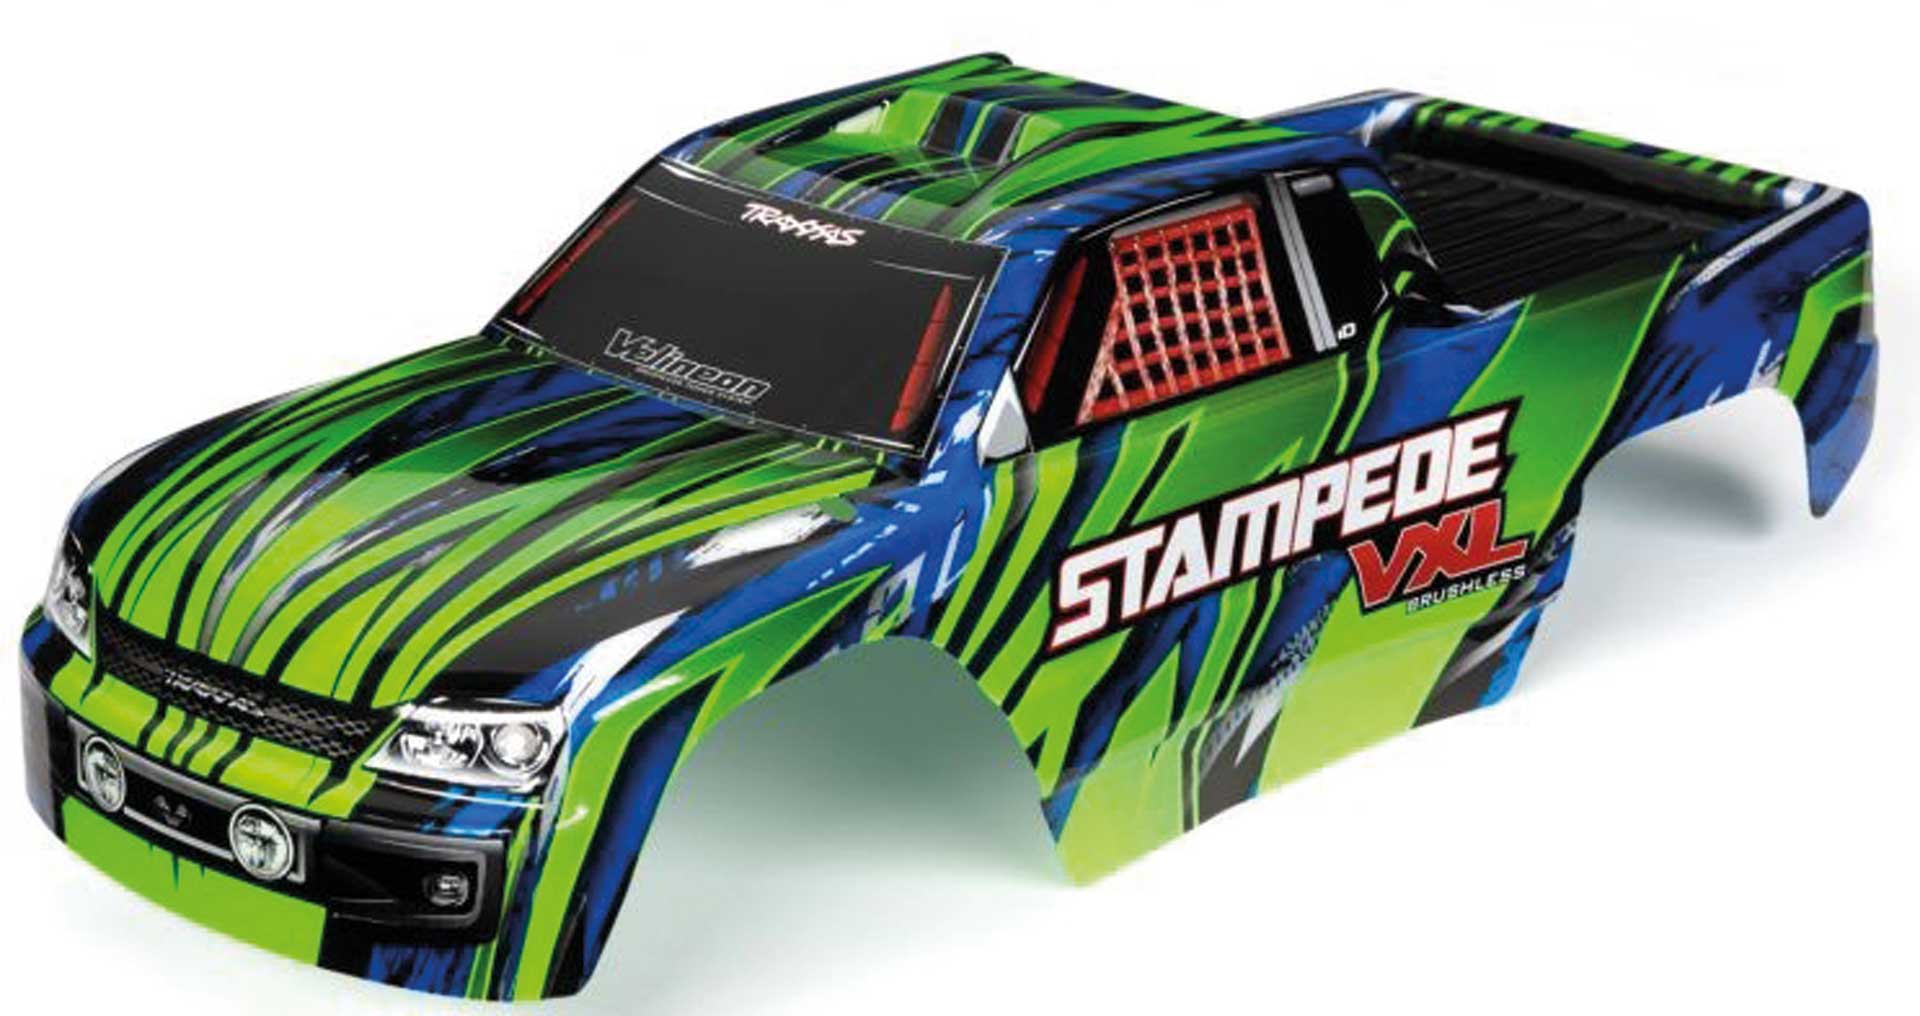 TRAXXAS Body Stampede 2WD / VXL green/blue painted